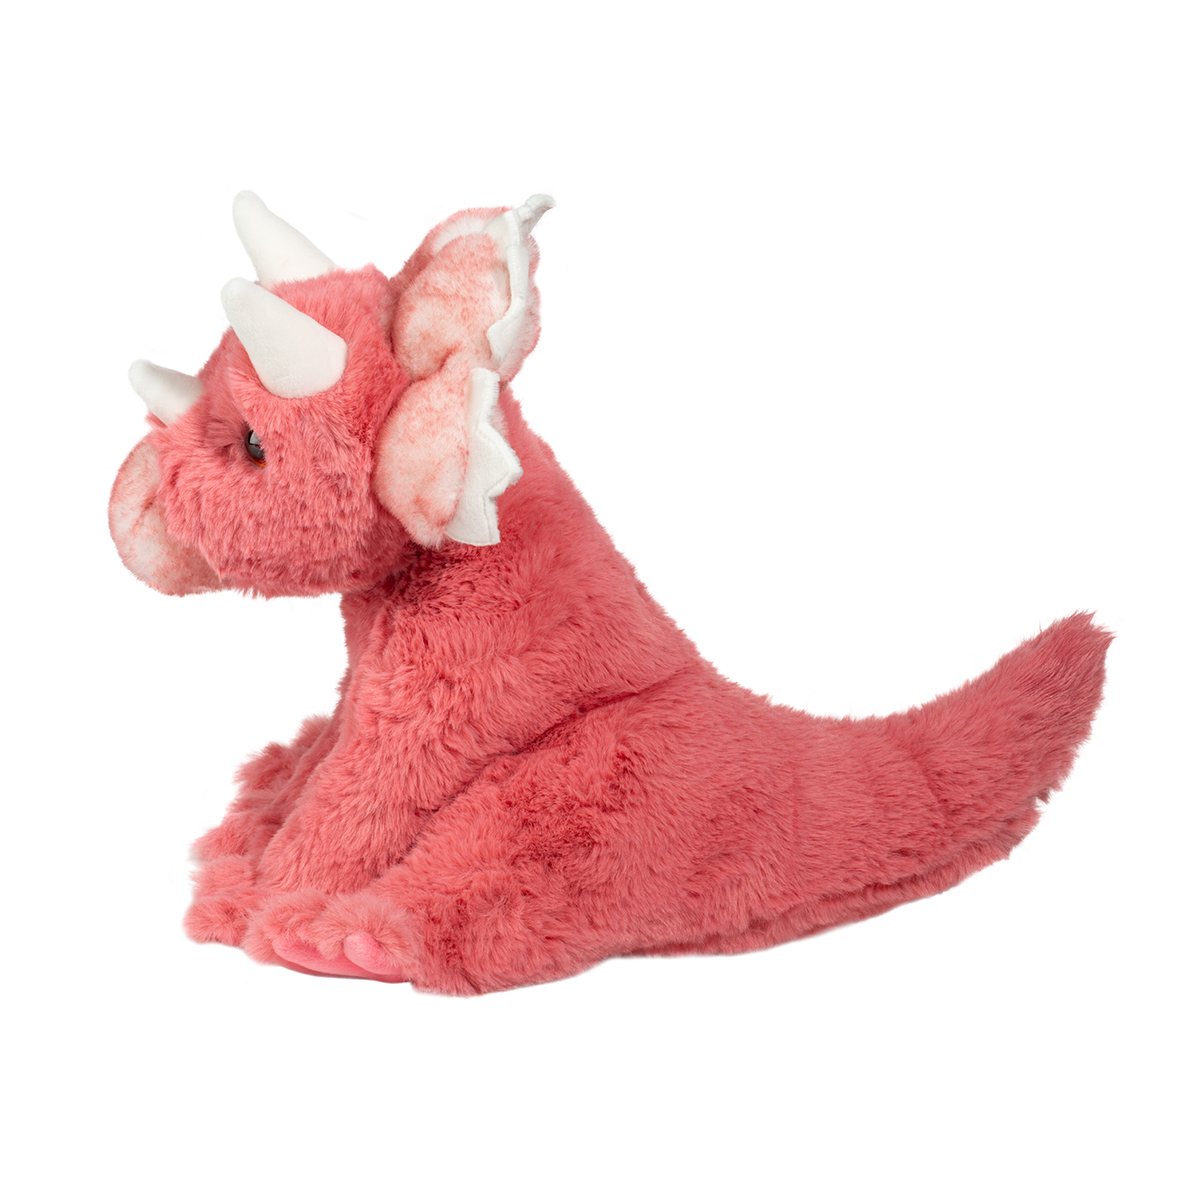 Tracie the Soft Pink Dino